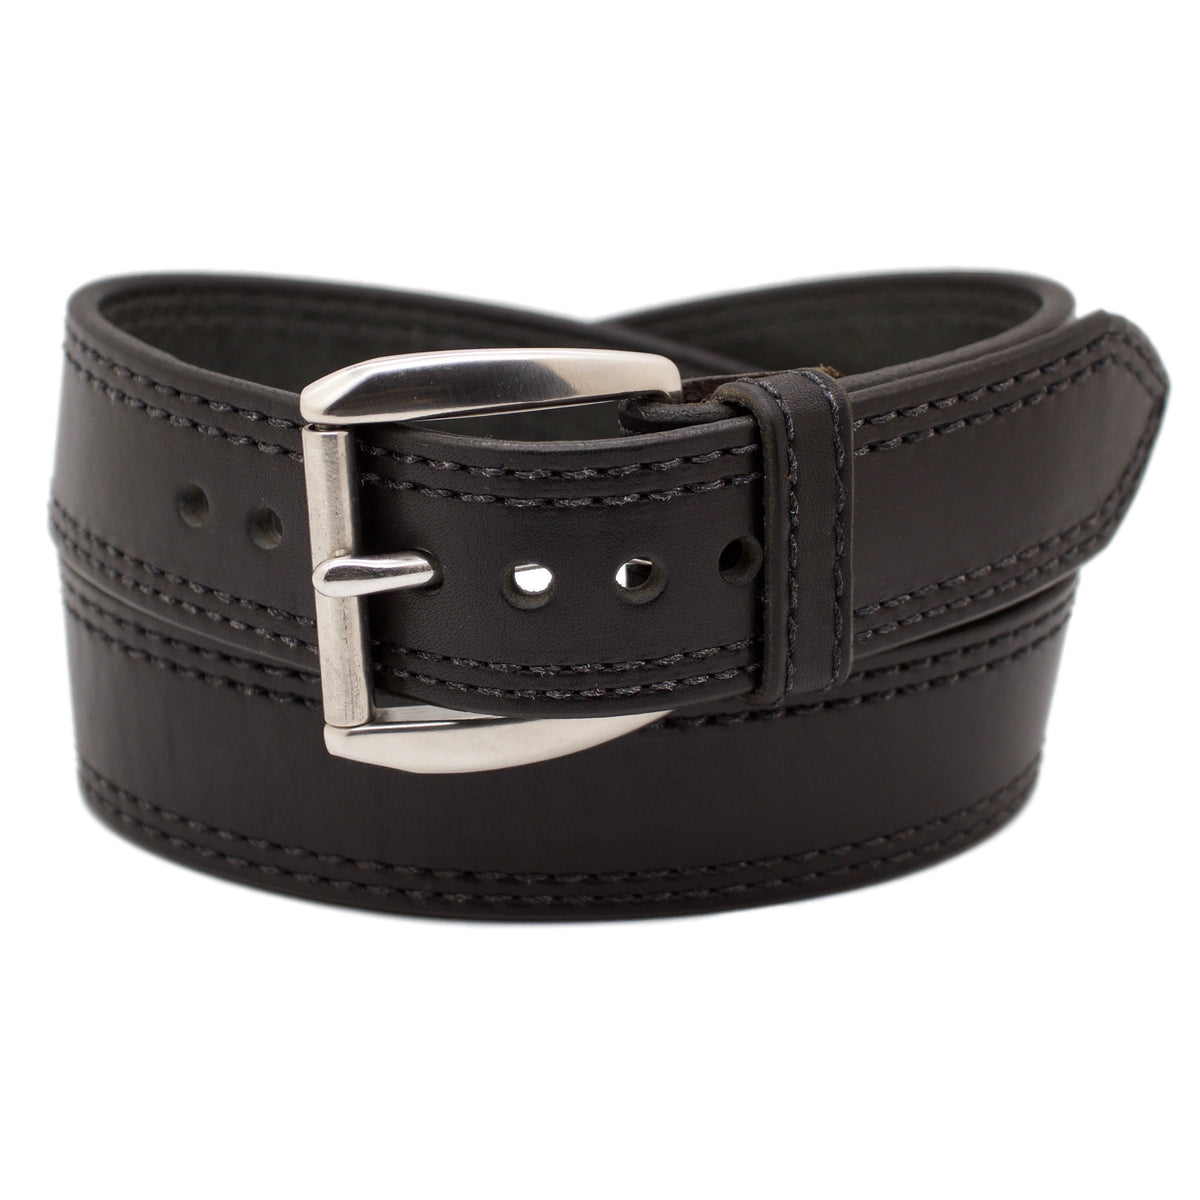 The ONYX Wide Leather Belt with Stainless Steel | Scottsdale Belt Co ...